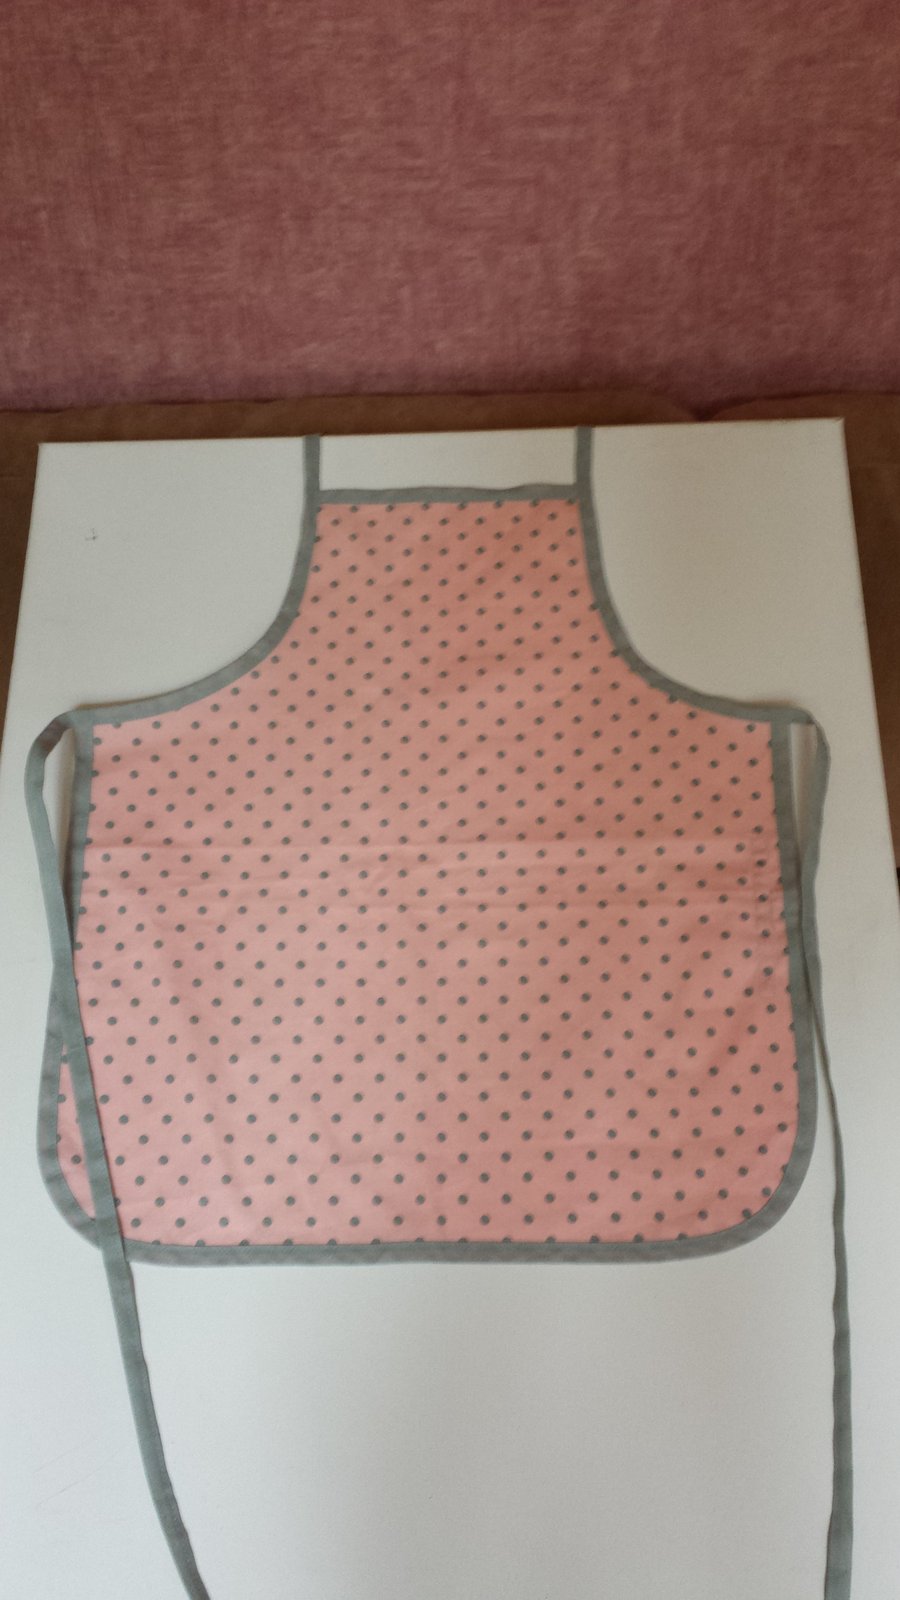 Child's cotton apron in pink & grey polka dot fabric